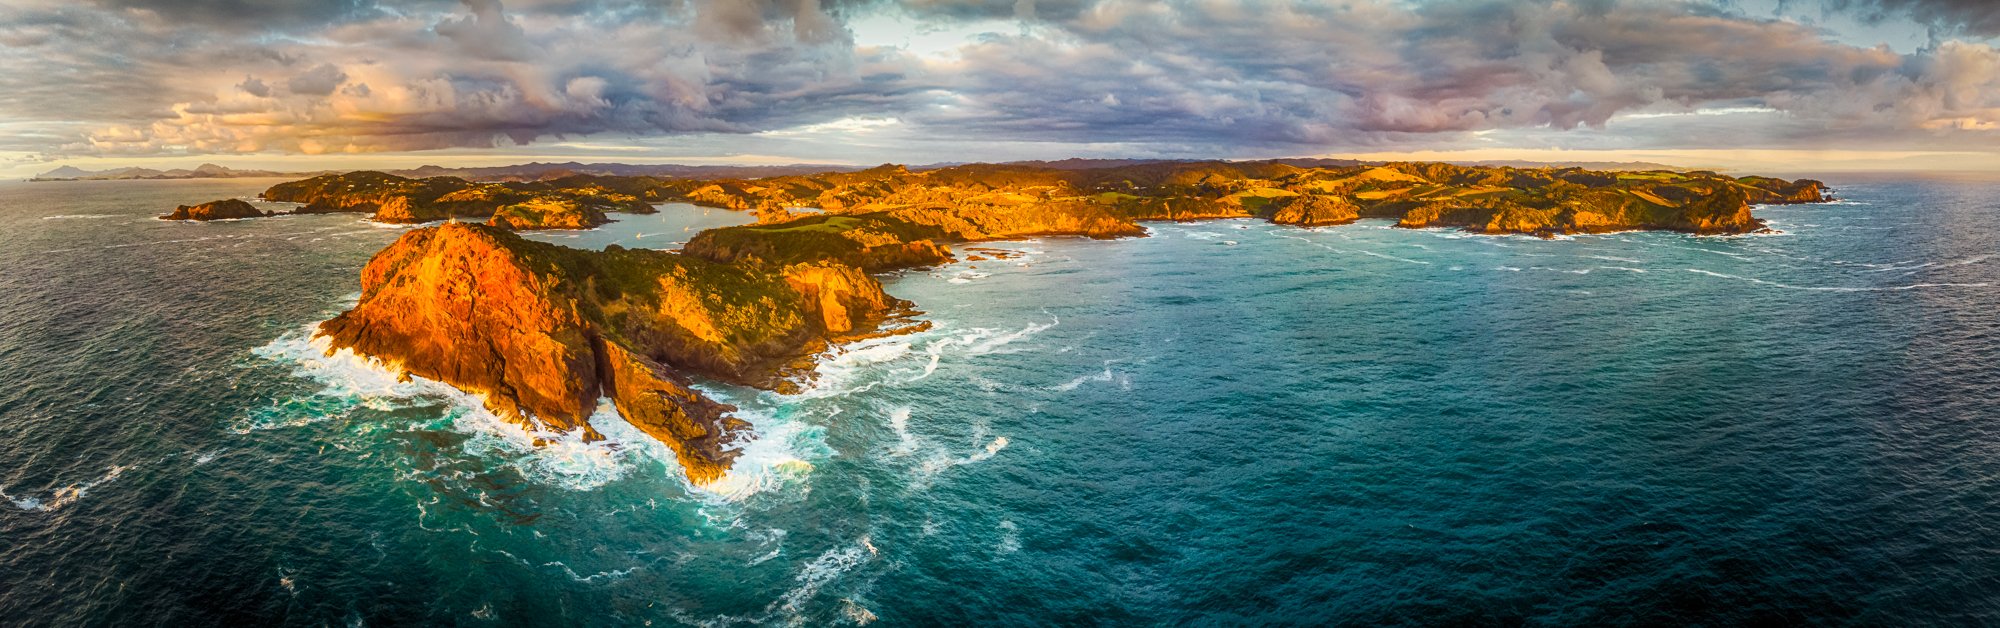 Quality fine art print of Tutukaka from the air